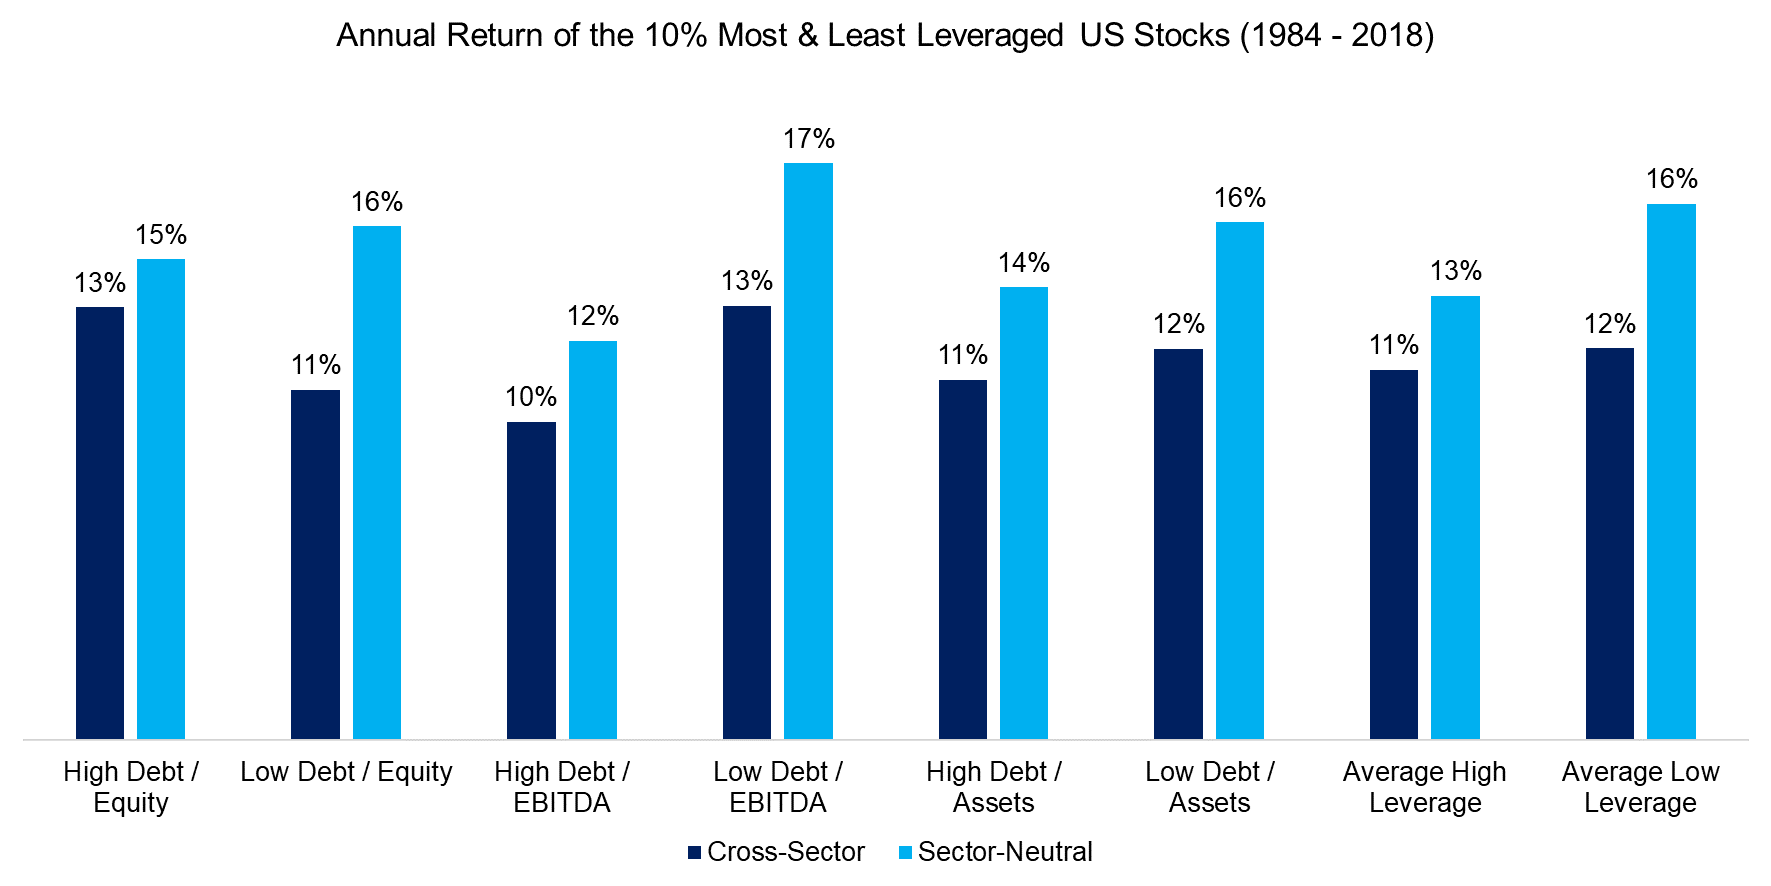 Annual Return of the 10% Most & Least Leveraged US Stocks (1984 - 2018)